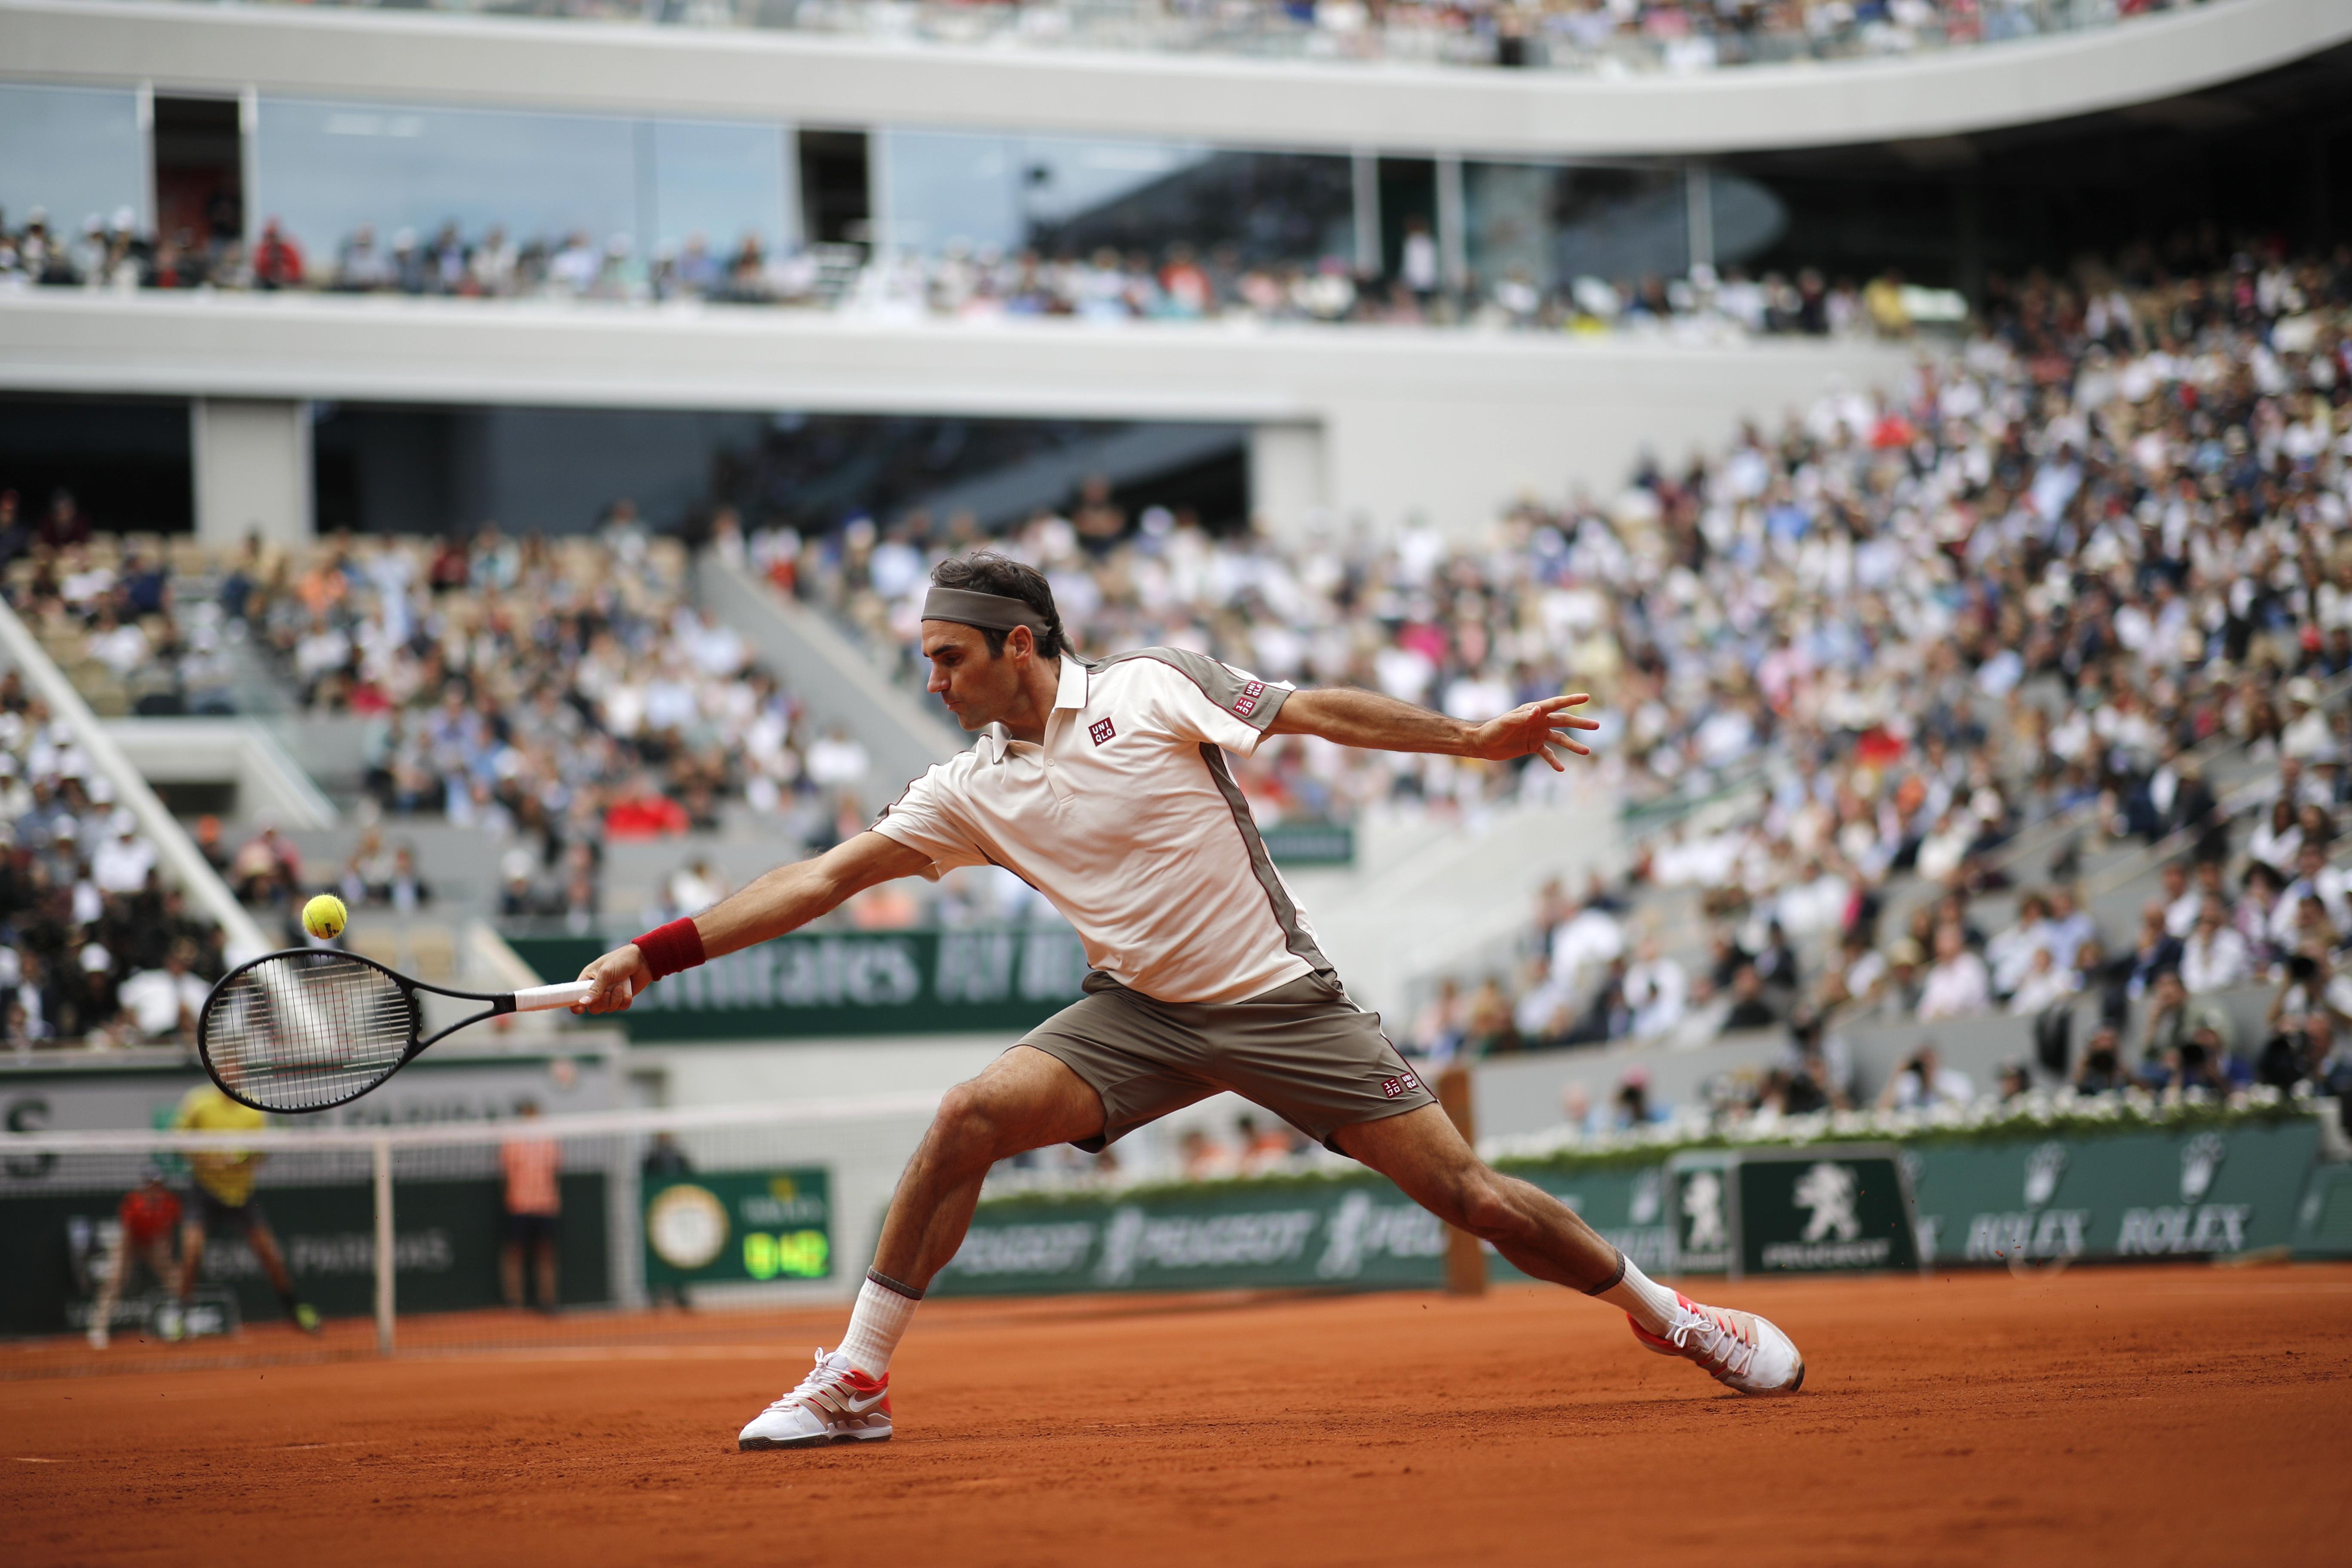 ‘Super old’ Roger Federer to face ex-contemporary’s son at French Open